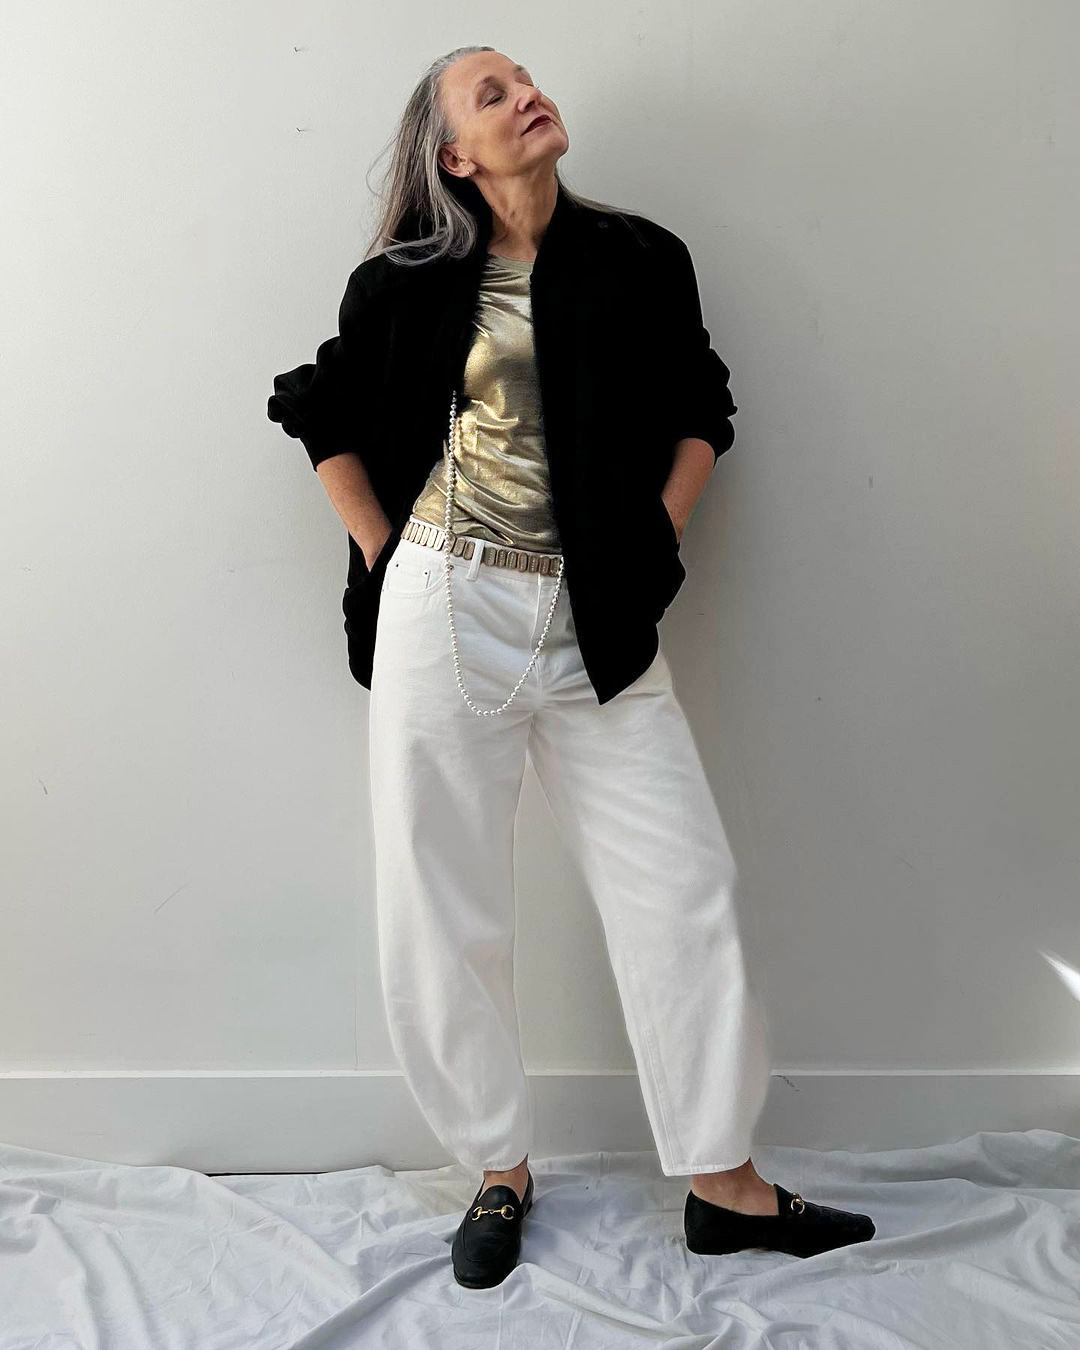 Fashion for Older Women: Capri Pants for the Summer Months | Sixty and Me |  Over 50 womens fashion, Over 60 fashion, Fashion